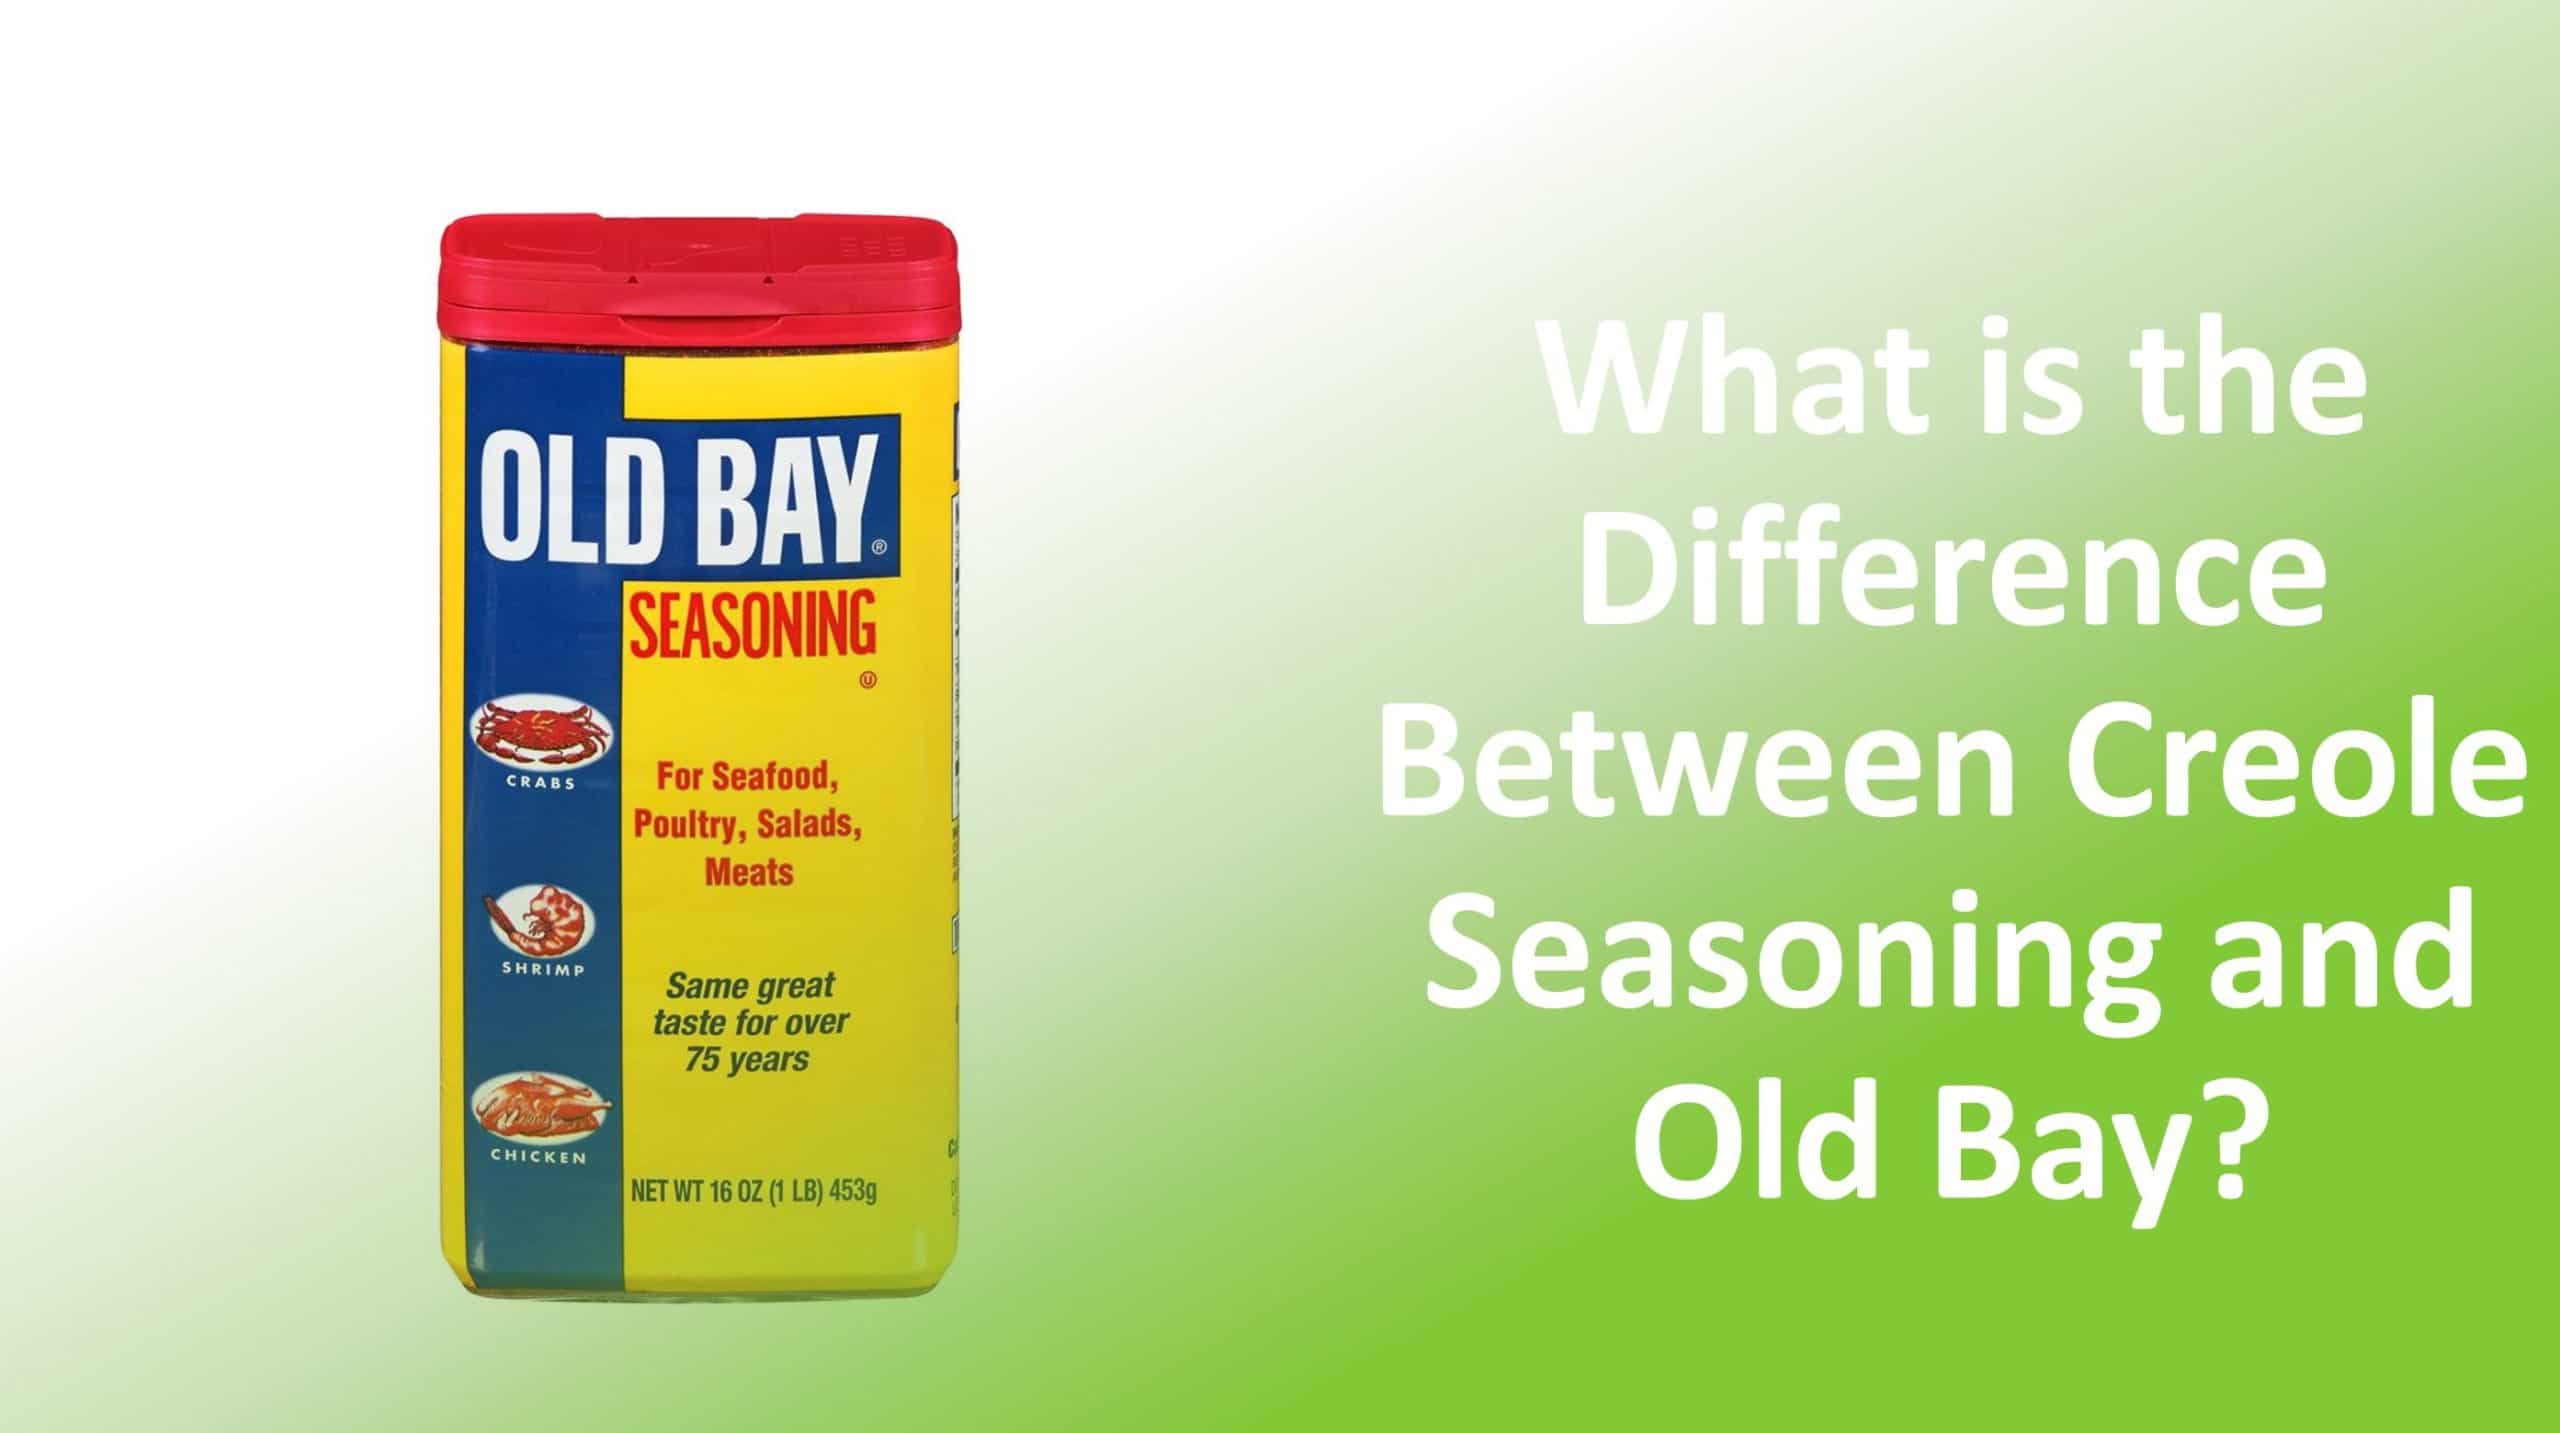 https://www.foodchamps.org/wp-content/uploads/2022/02/what-is-the-difference-between-creole-seasoning-and-old-bay-scaled.jpg